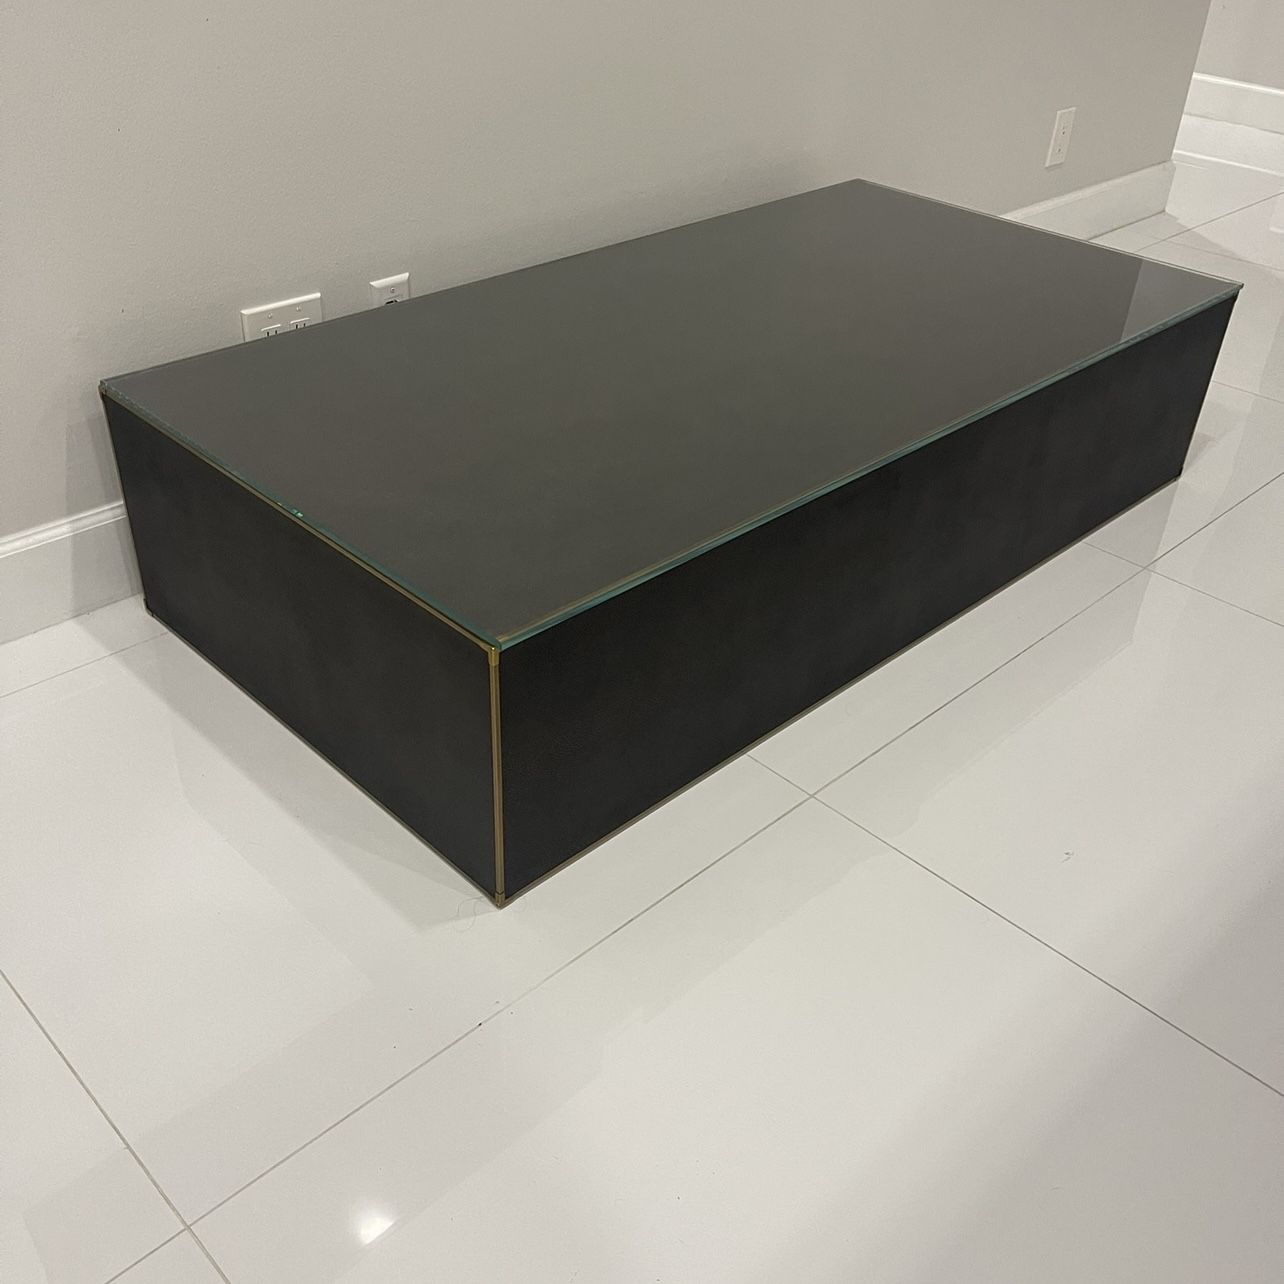 Restoration Hardware  COFFEE TABLE - 60in x 30in - Amazing Condition- Originally $2800     Asking $325